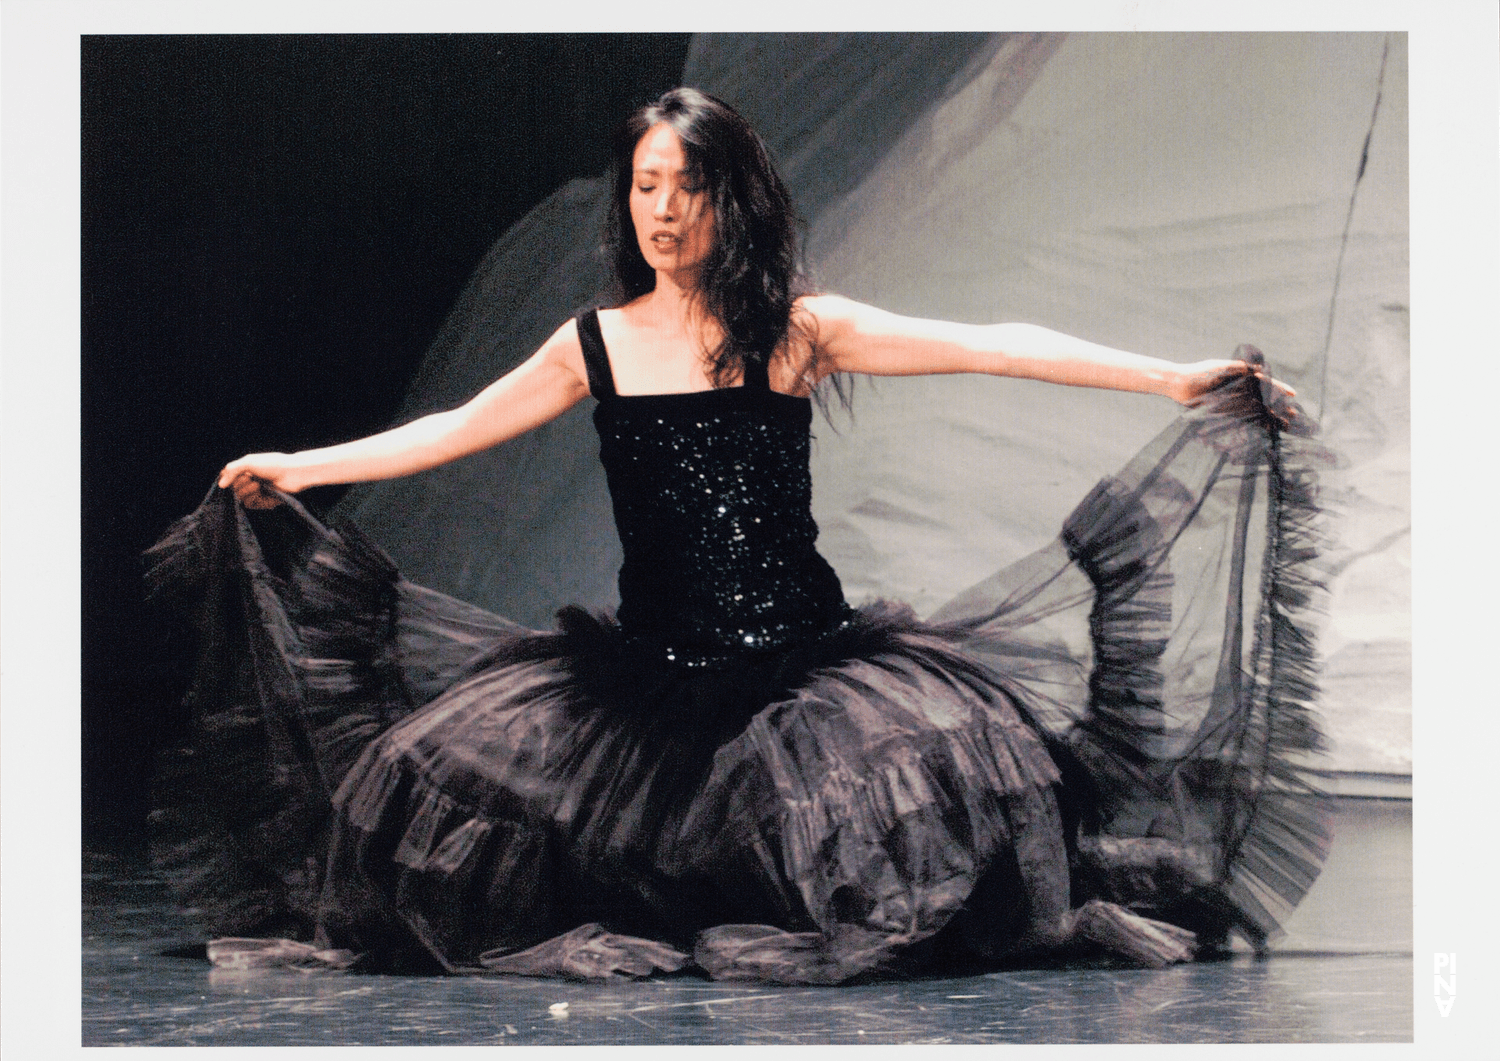 Nayoung Kim in “Rough Cut” by Pina Bausch, April 14, 2005